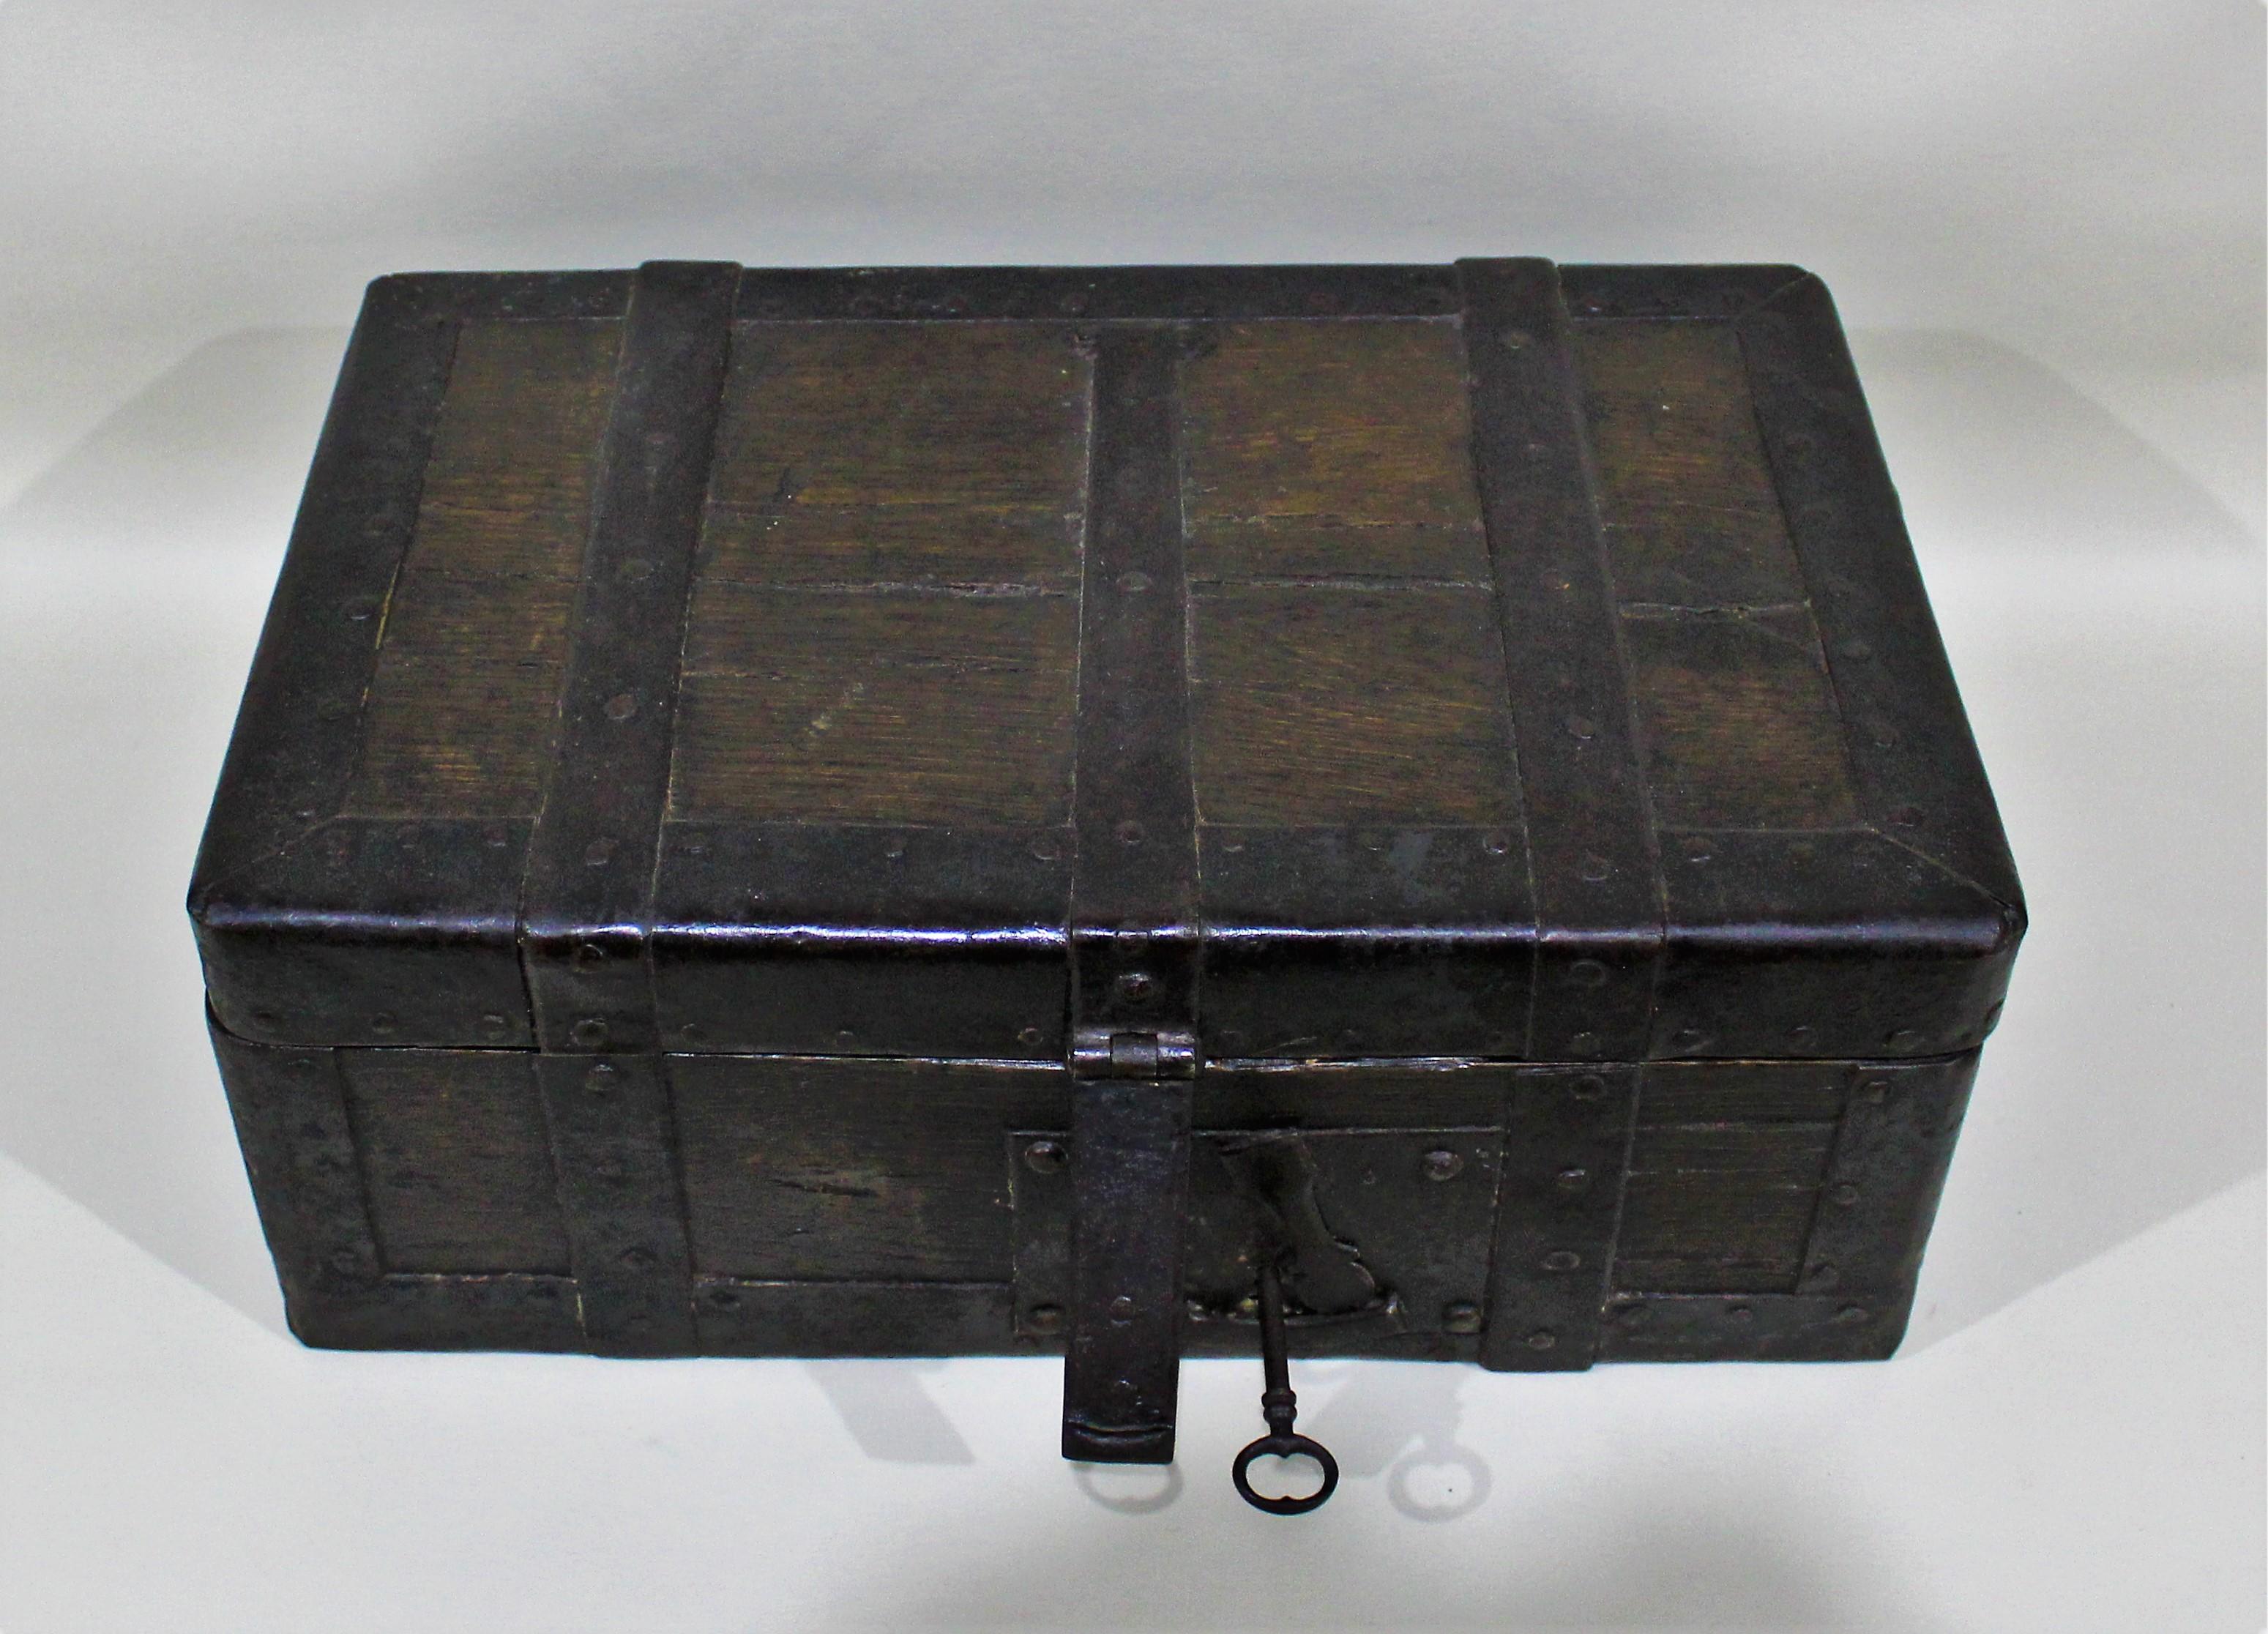 Antique 18th century wrought iron and wood strong box with hand forged hardware and lock.